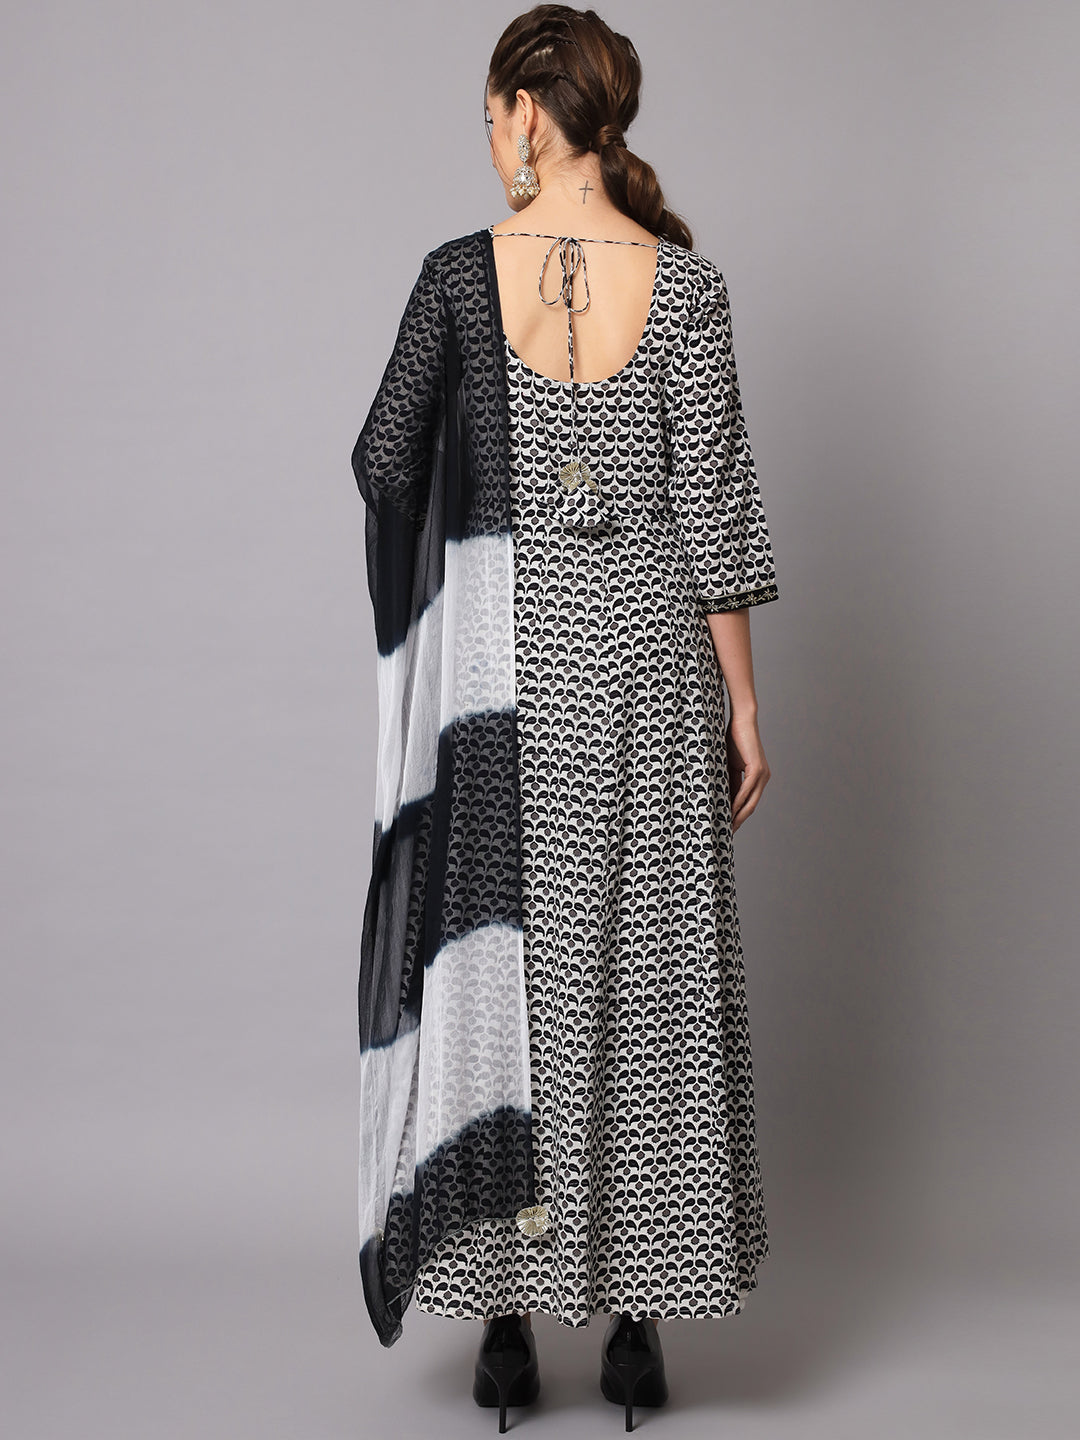 Black and White Dress with Dupatta